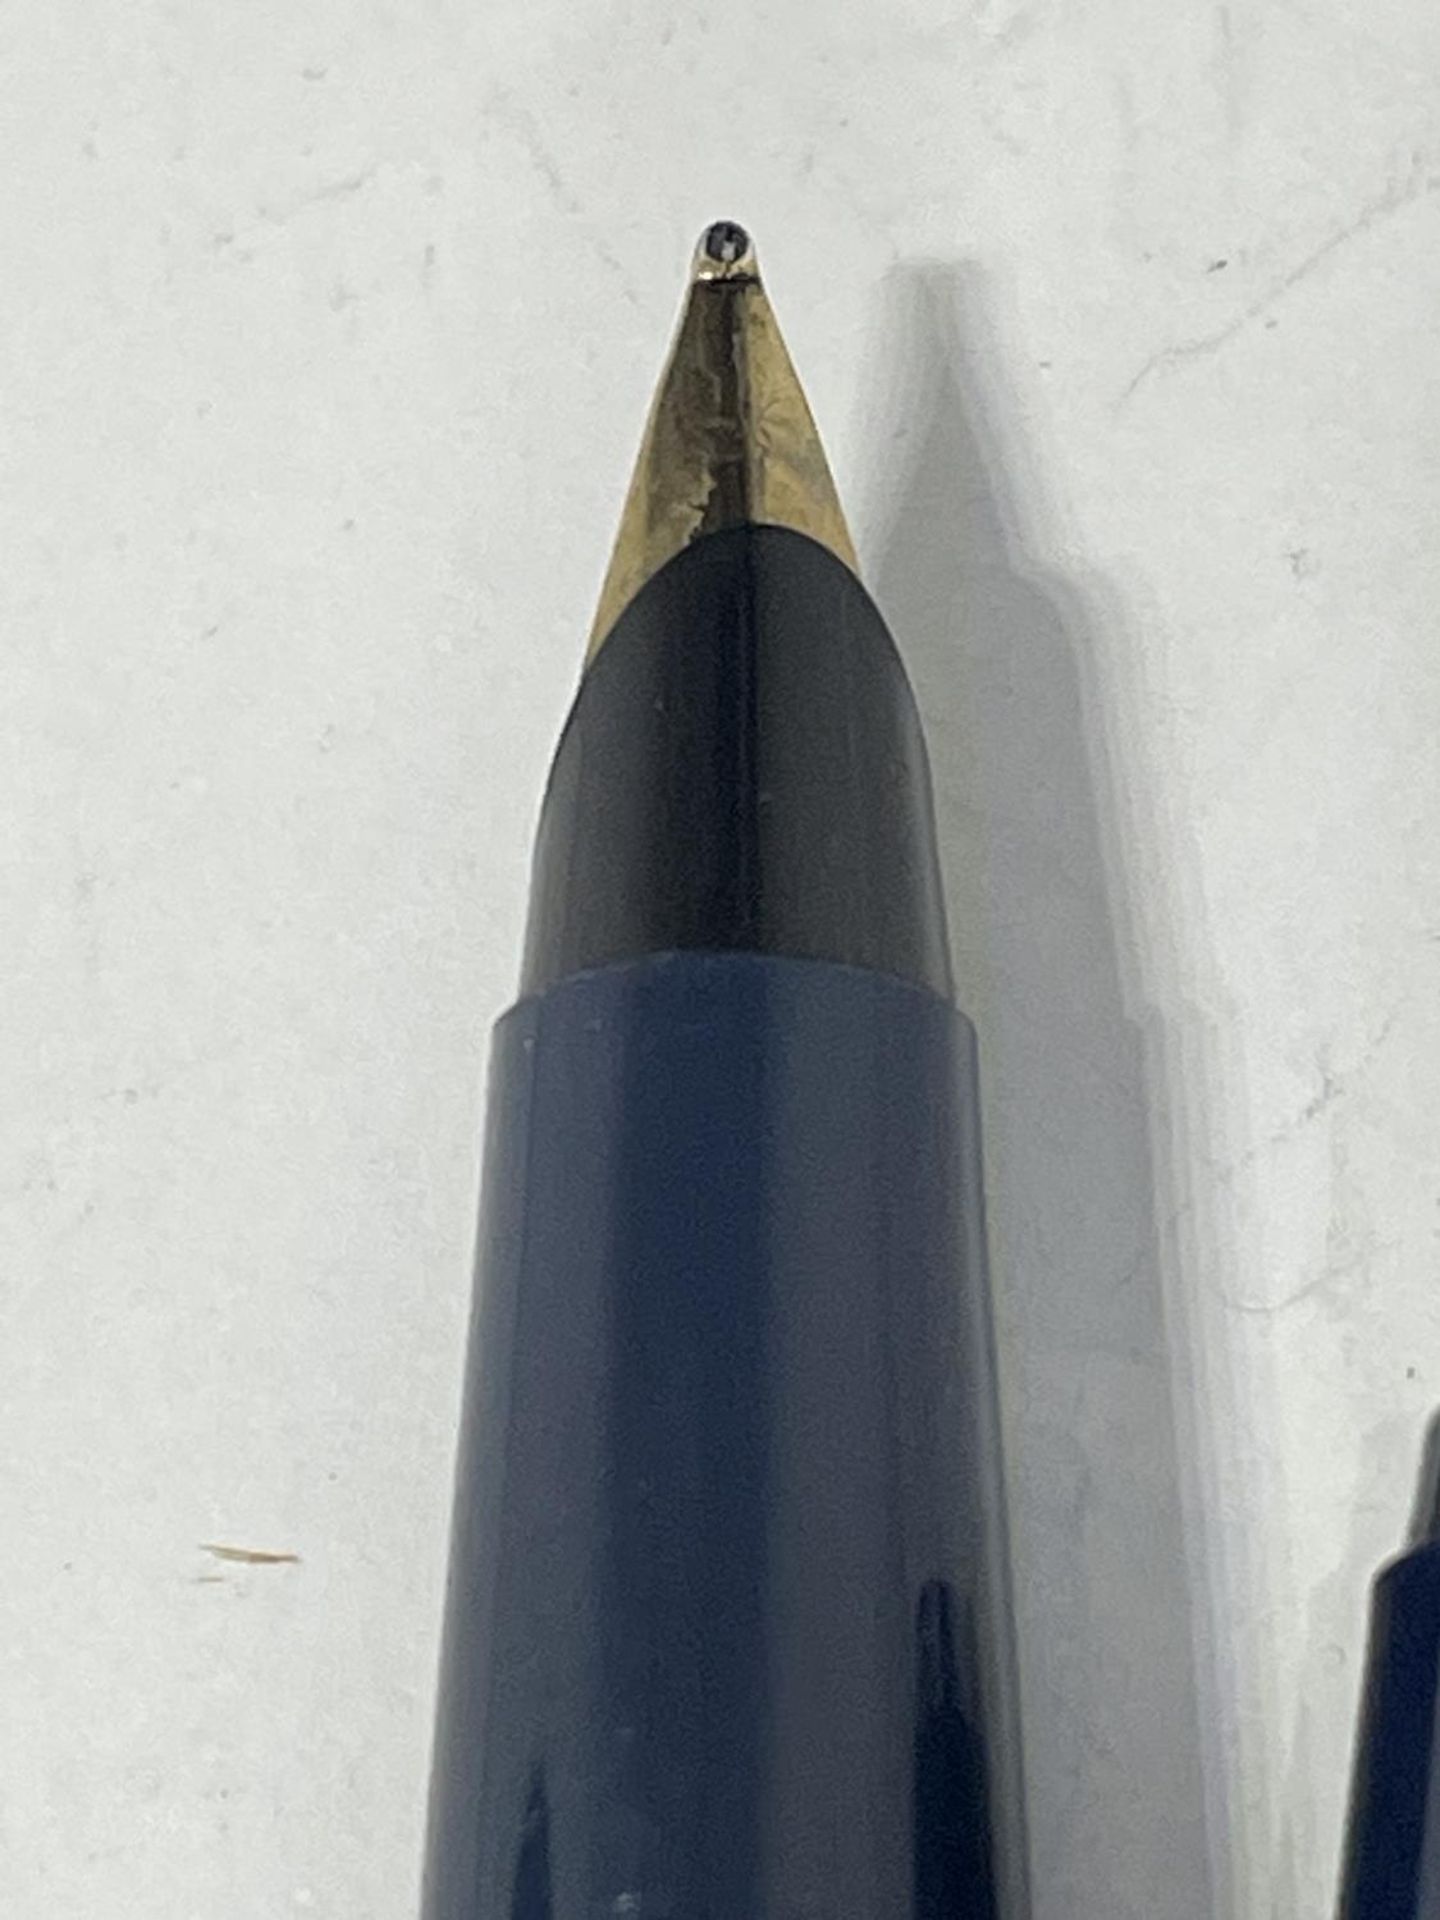 A PARKER FOUNTAIN PEN WITH A 14CT GOLD NIB - Image 2 of 2